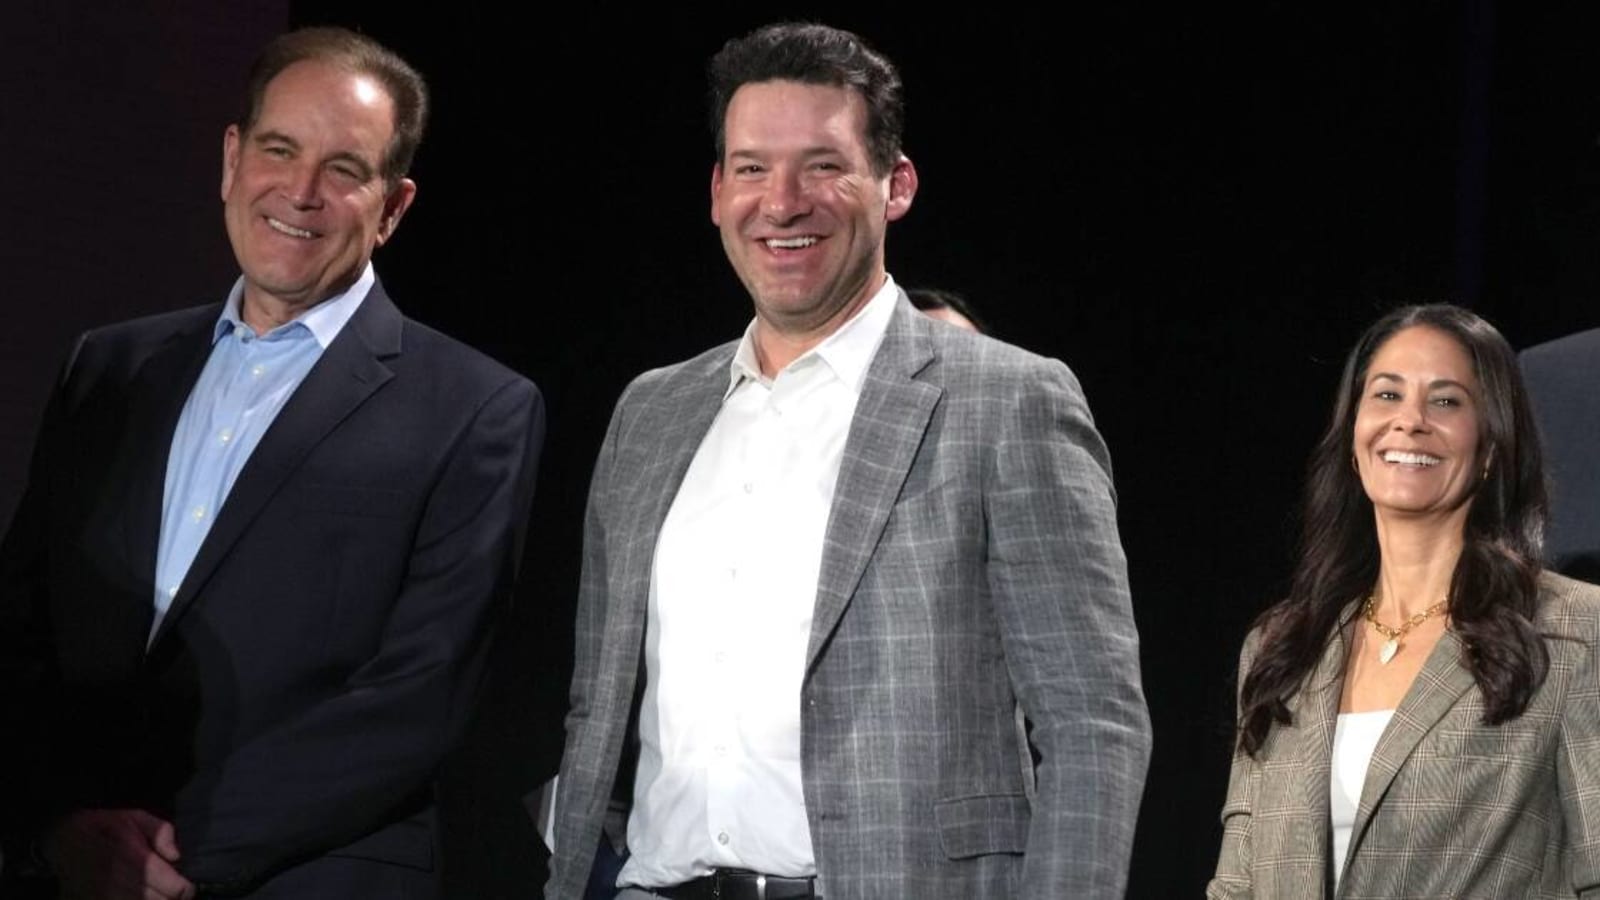 Jim Nantz defends Tony Romo from criticism: ‘Trying the best we can’